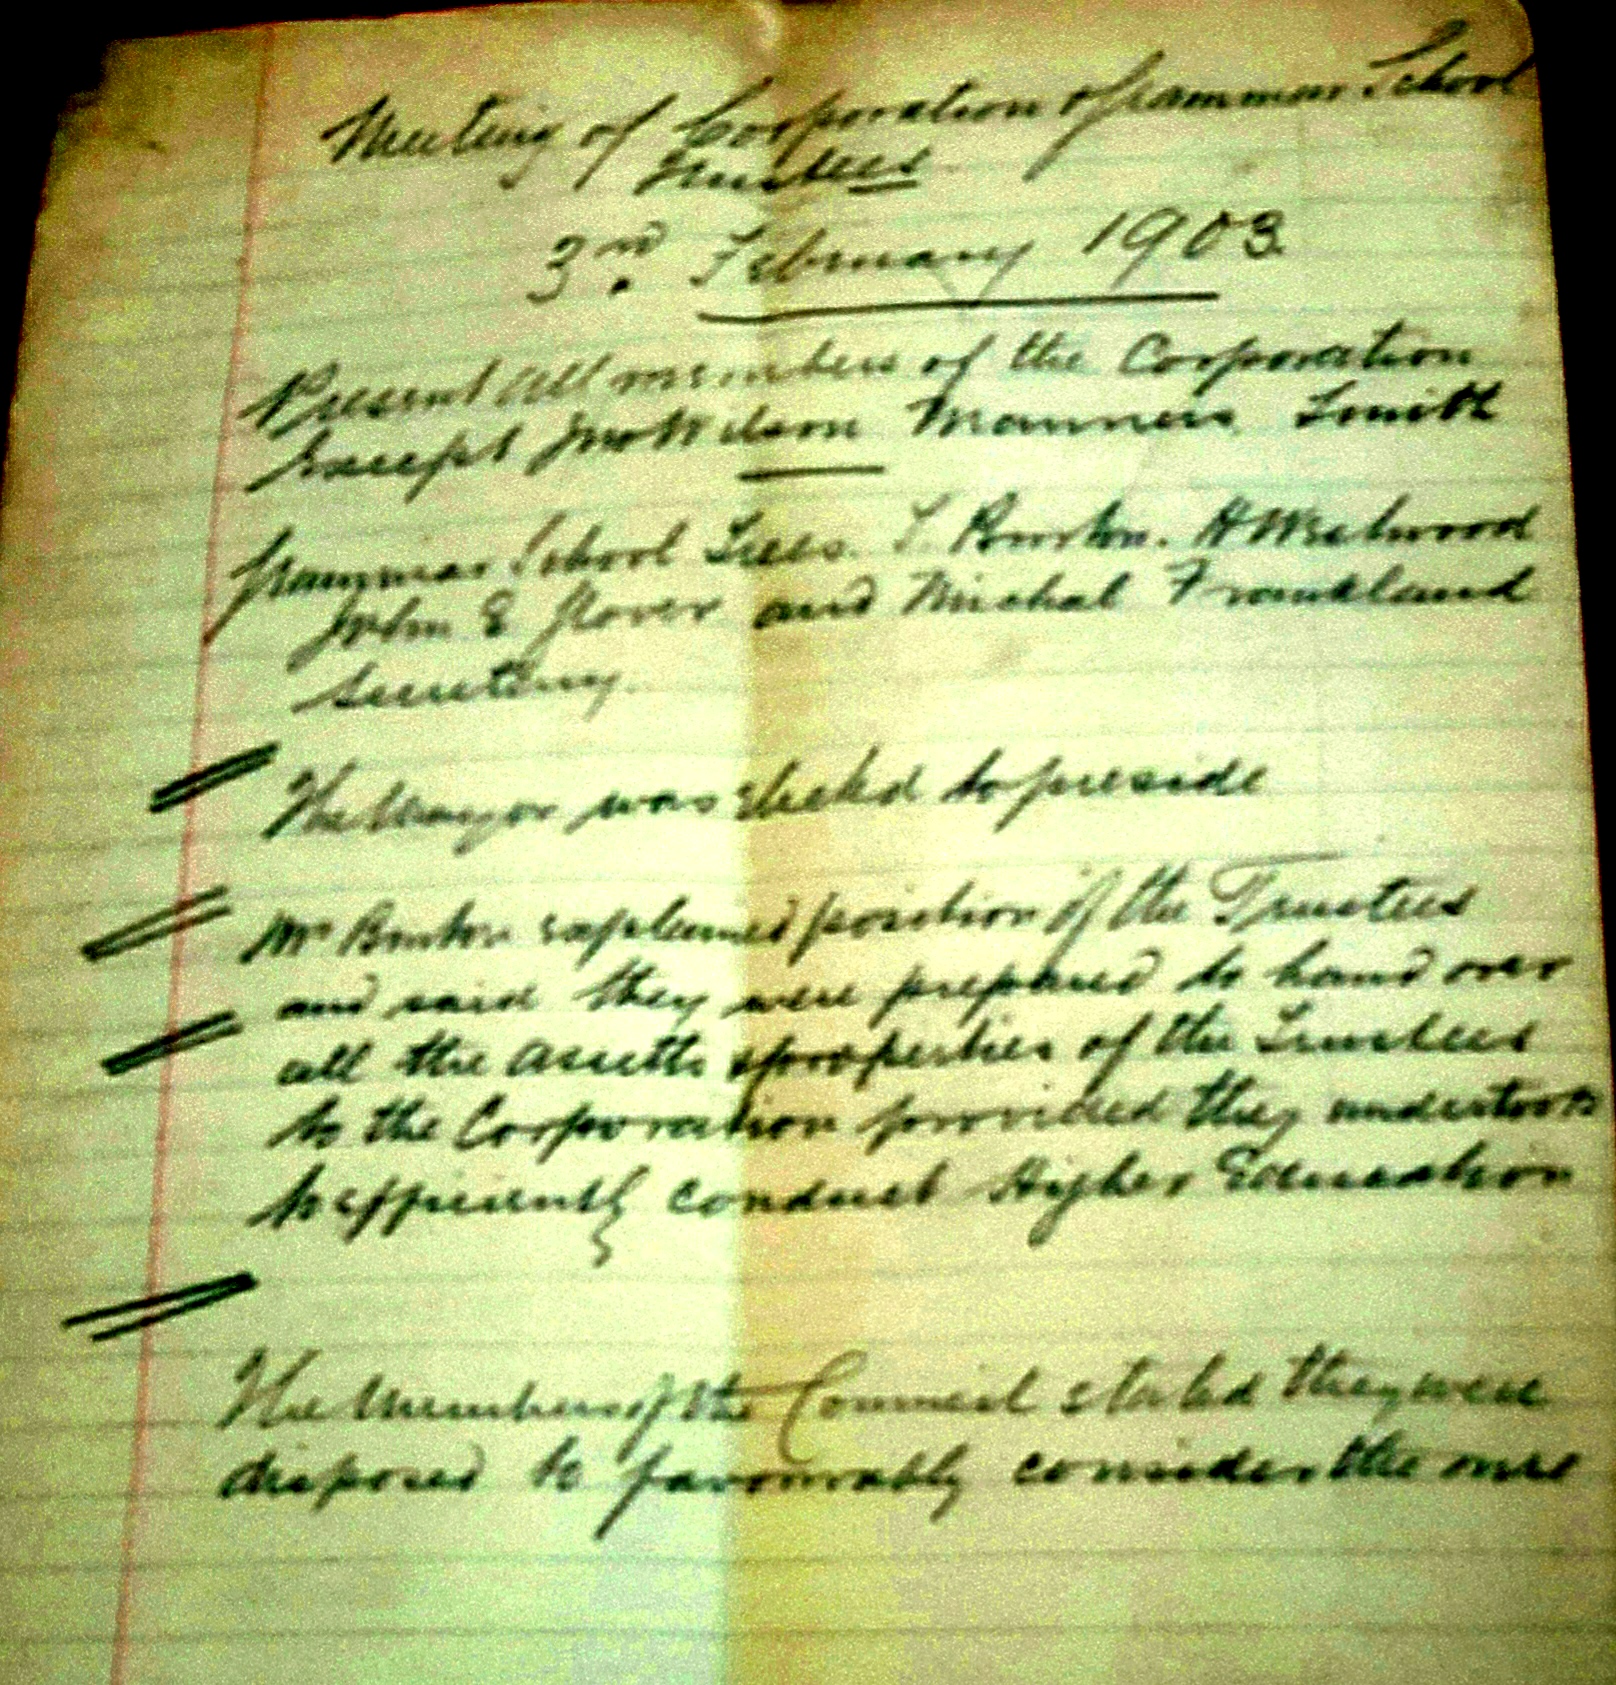 Meeting letter 1903